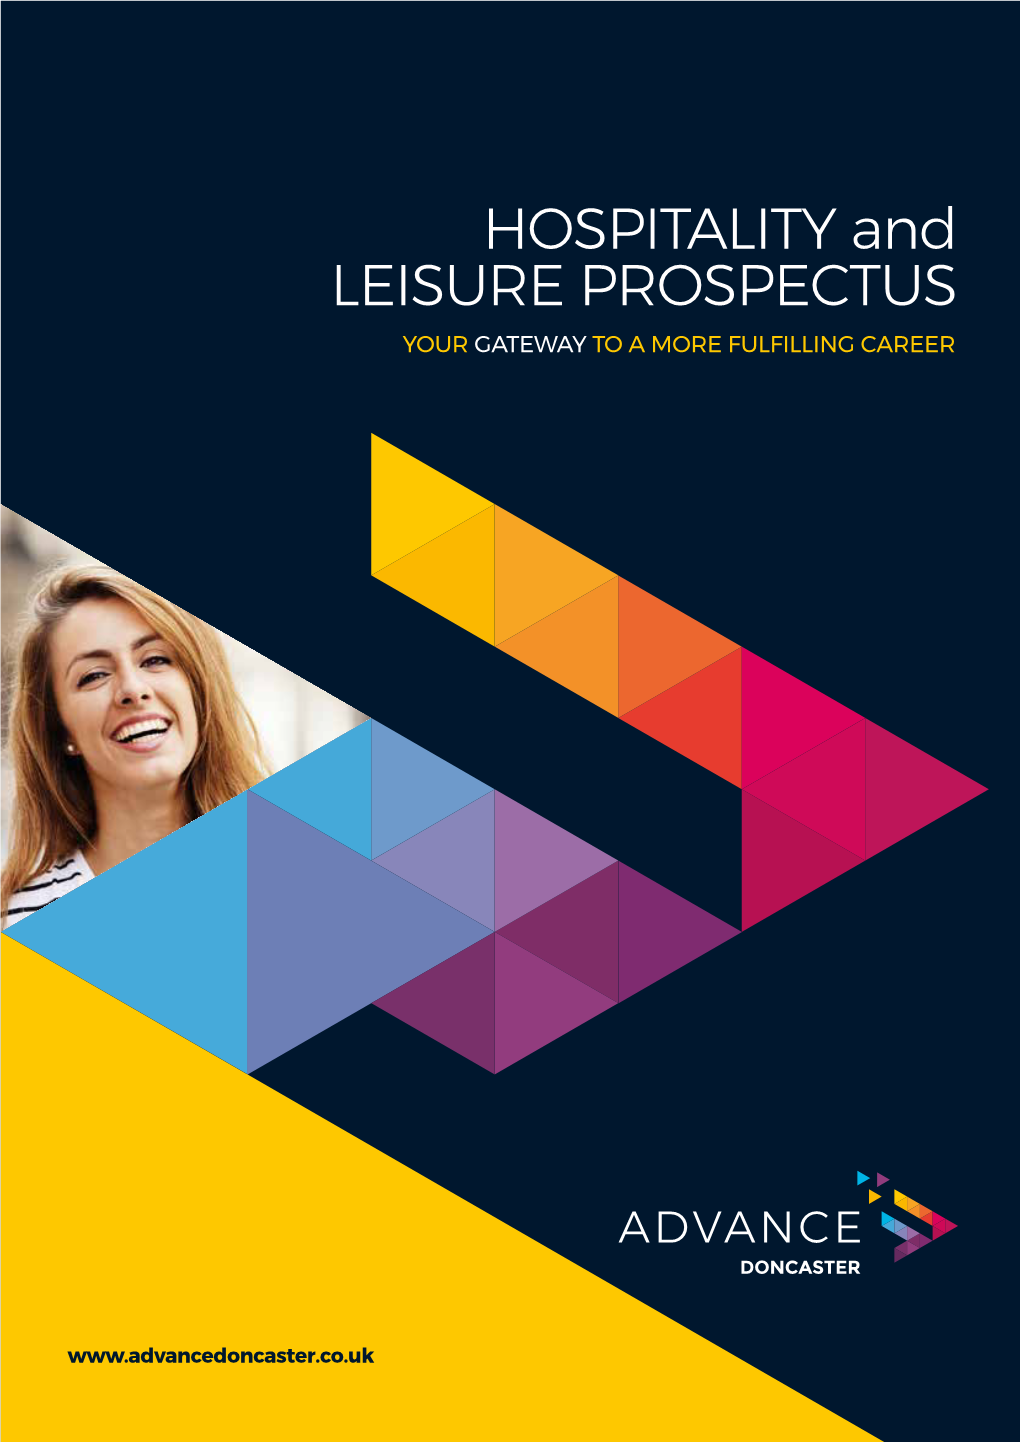 HOSPITALITY and LEISURE PROSPECTUS YOUR GATEWAY to a MORE FULFILLING CAREER